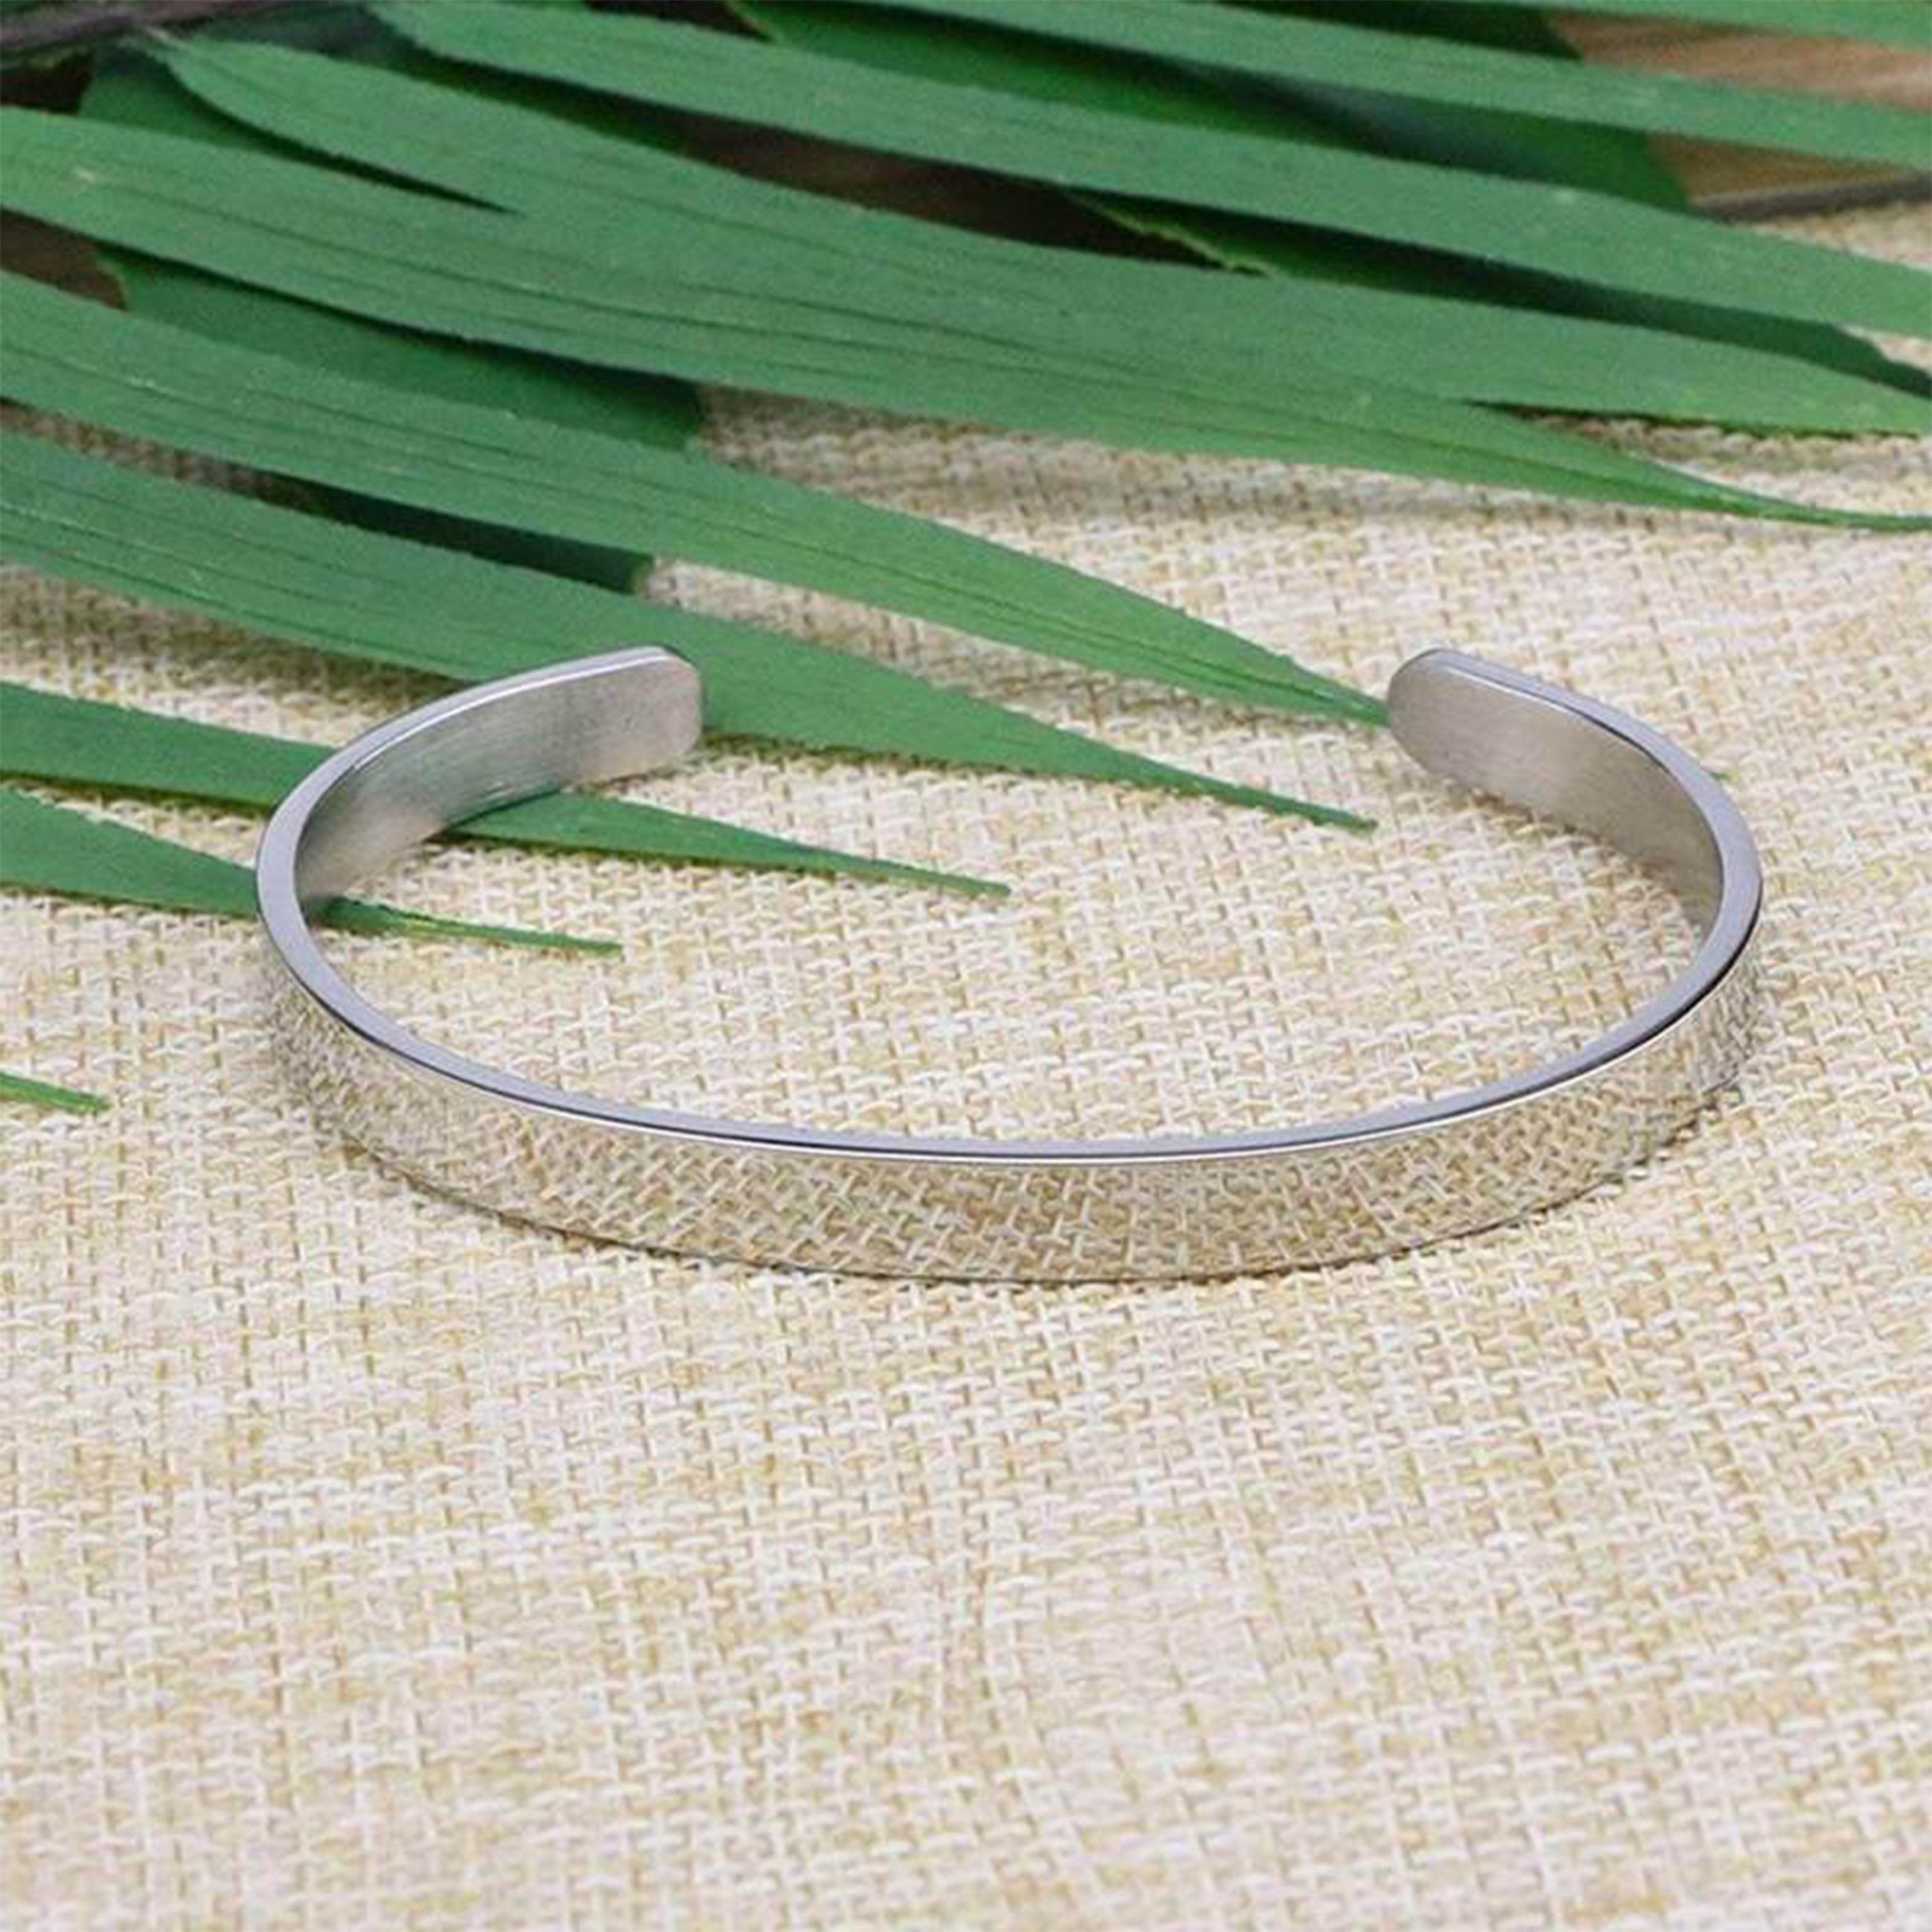 Outer view of the I may not have given you the gift of life but life gave me the gift of you bracelet with silver plating laying flat on a burlap surface with a leafy background